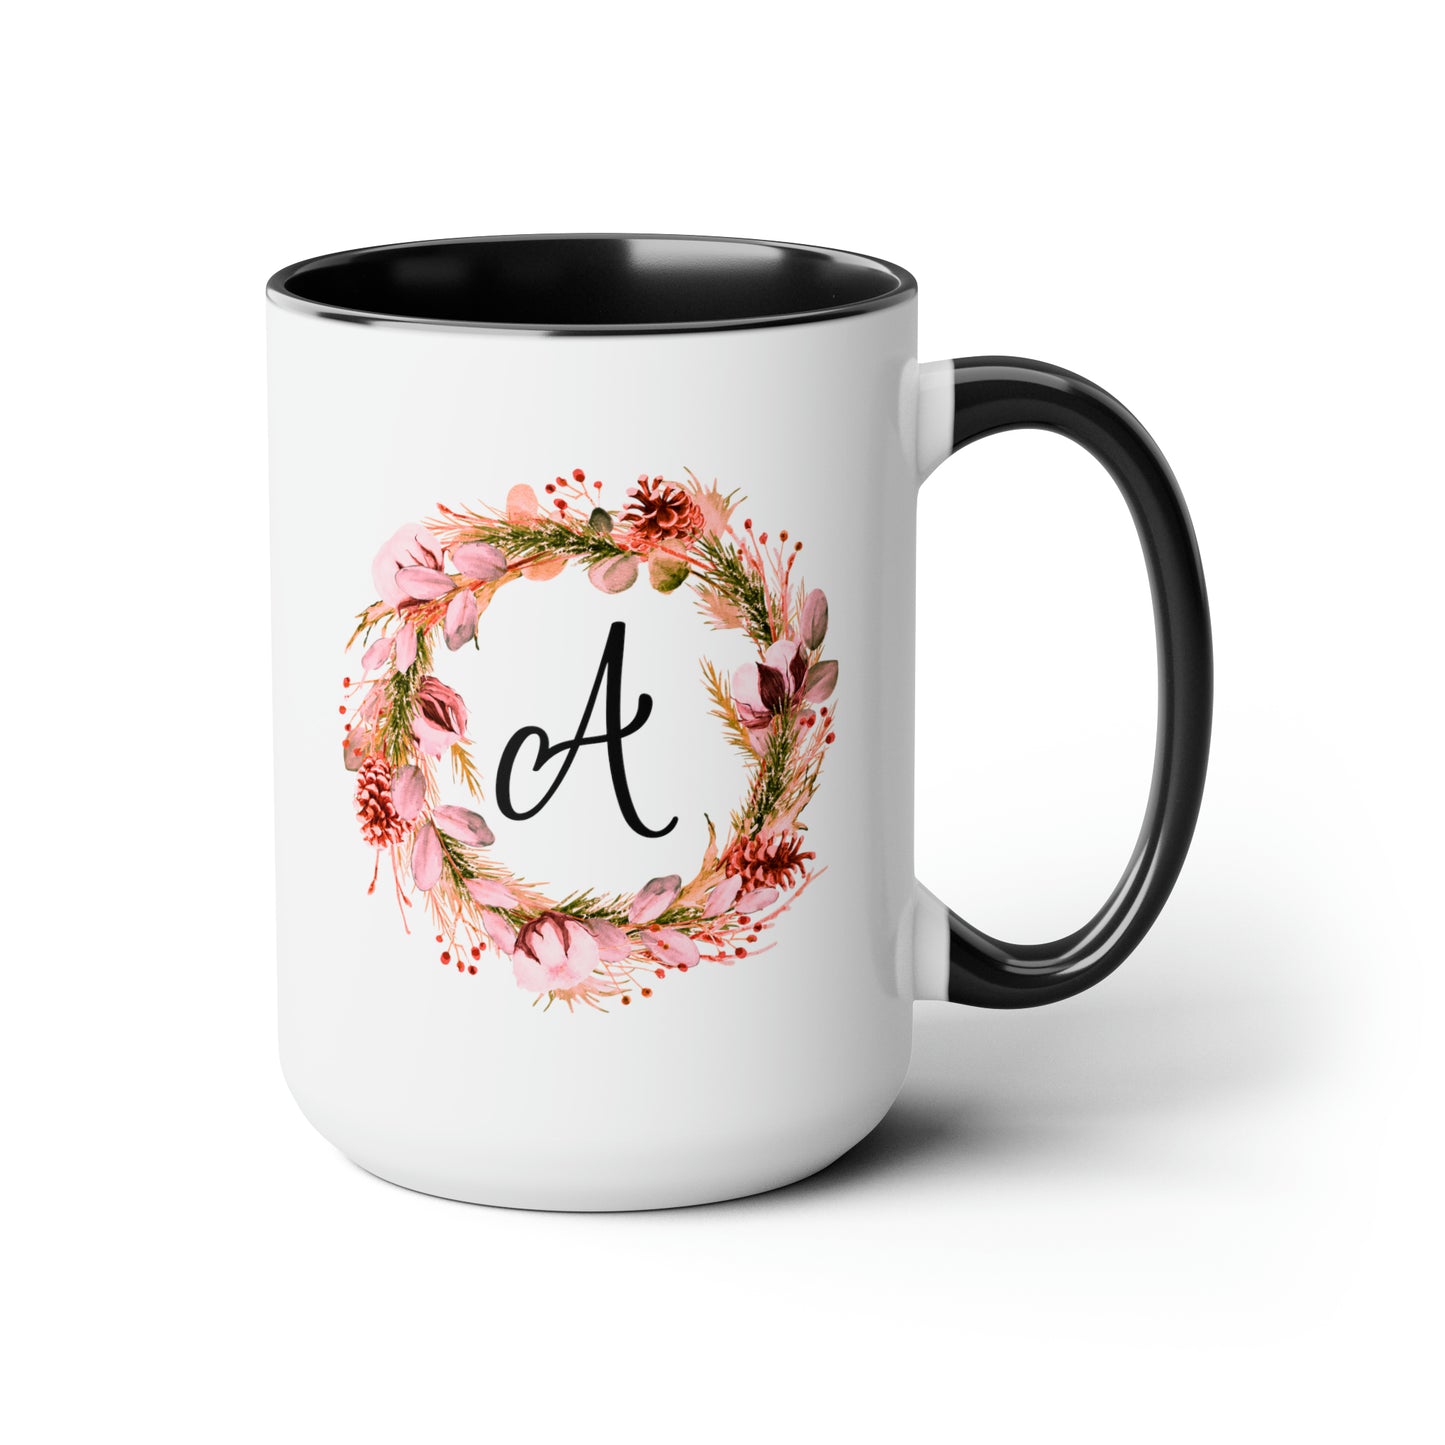 Bridesmaid Initial 15oz white with black accent funny large coffee mug gift for bridal shower party maid of honor custom cup personalized name letter waveywares wavey wares wavywares wavy wares